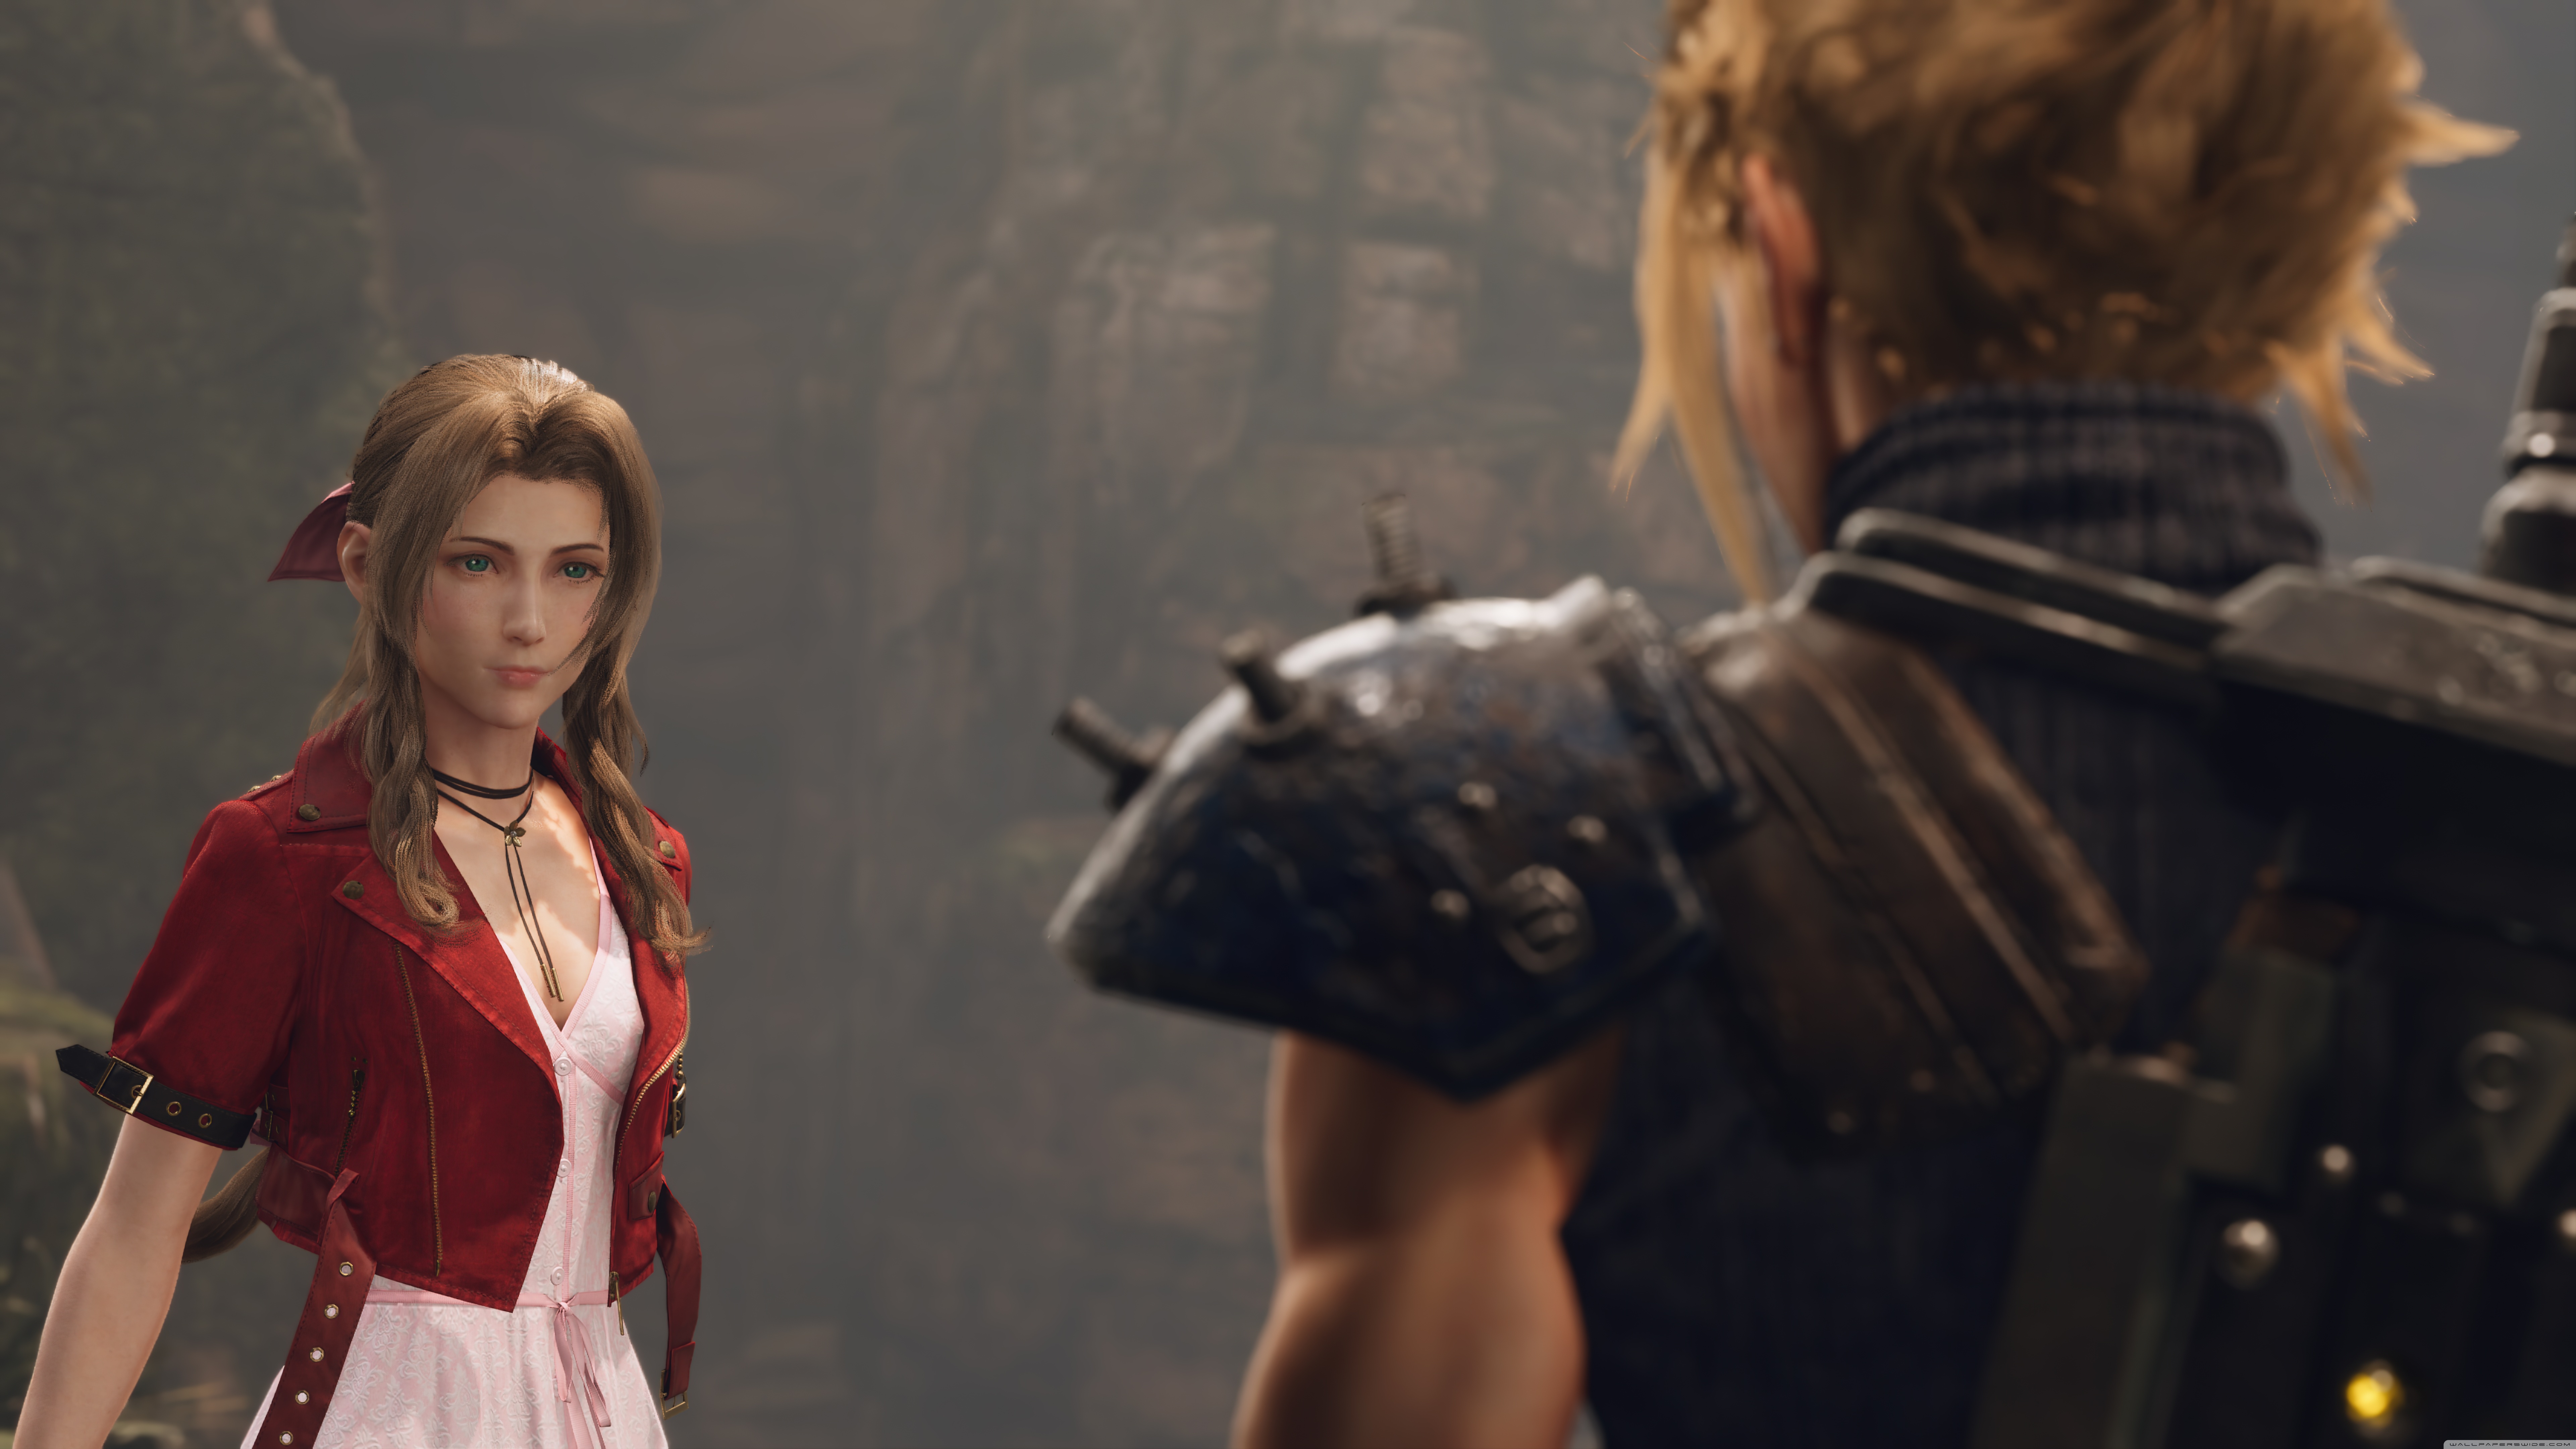 Cloud And Aerith Wallpapers